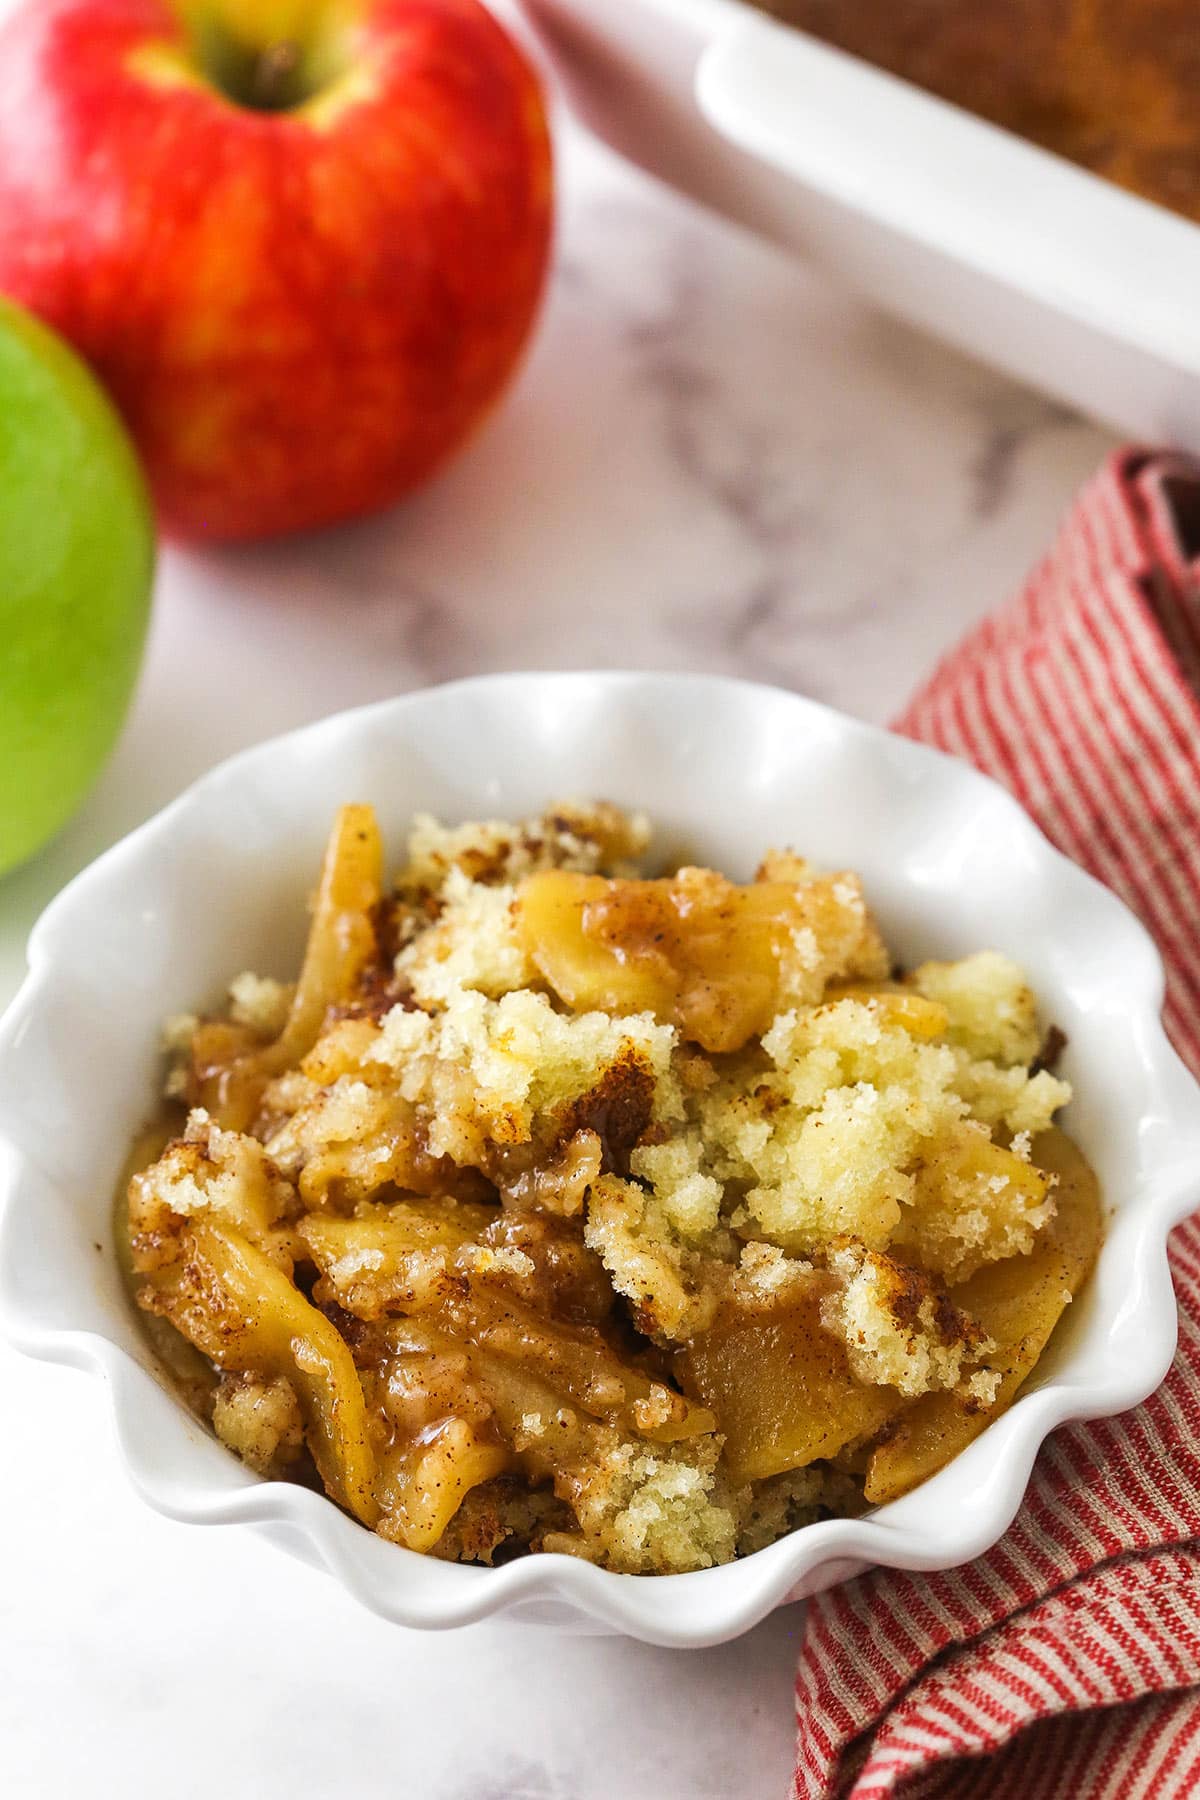 A serving of homemade apple cobbler in a bowl on a marble countertop